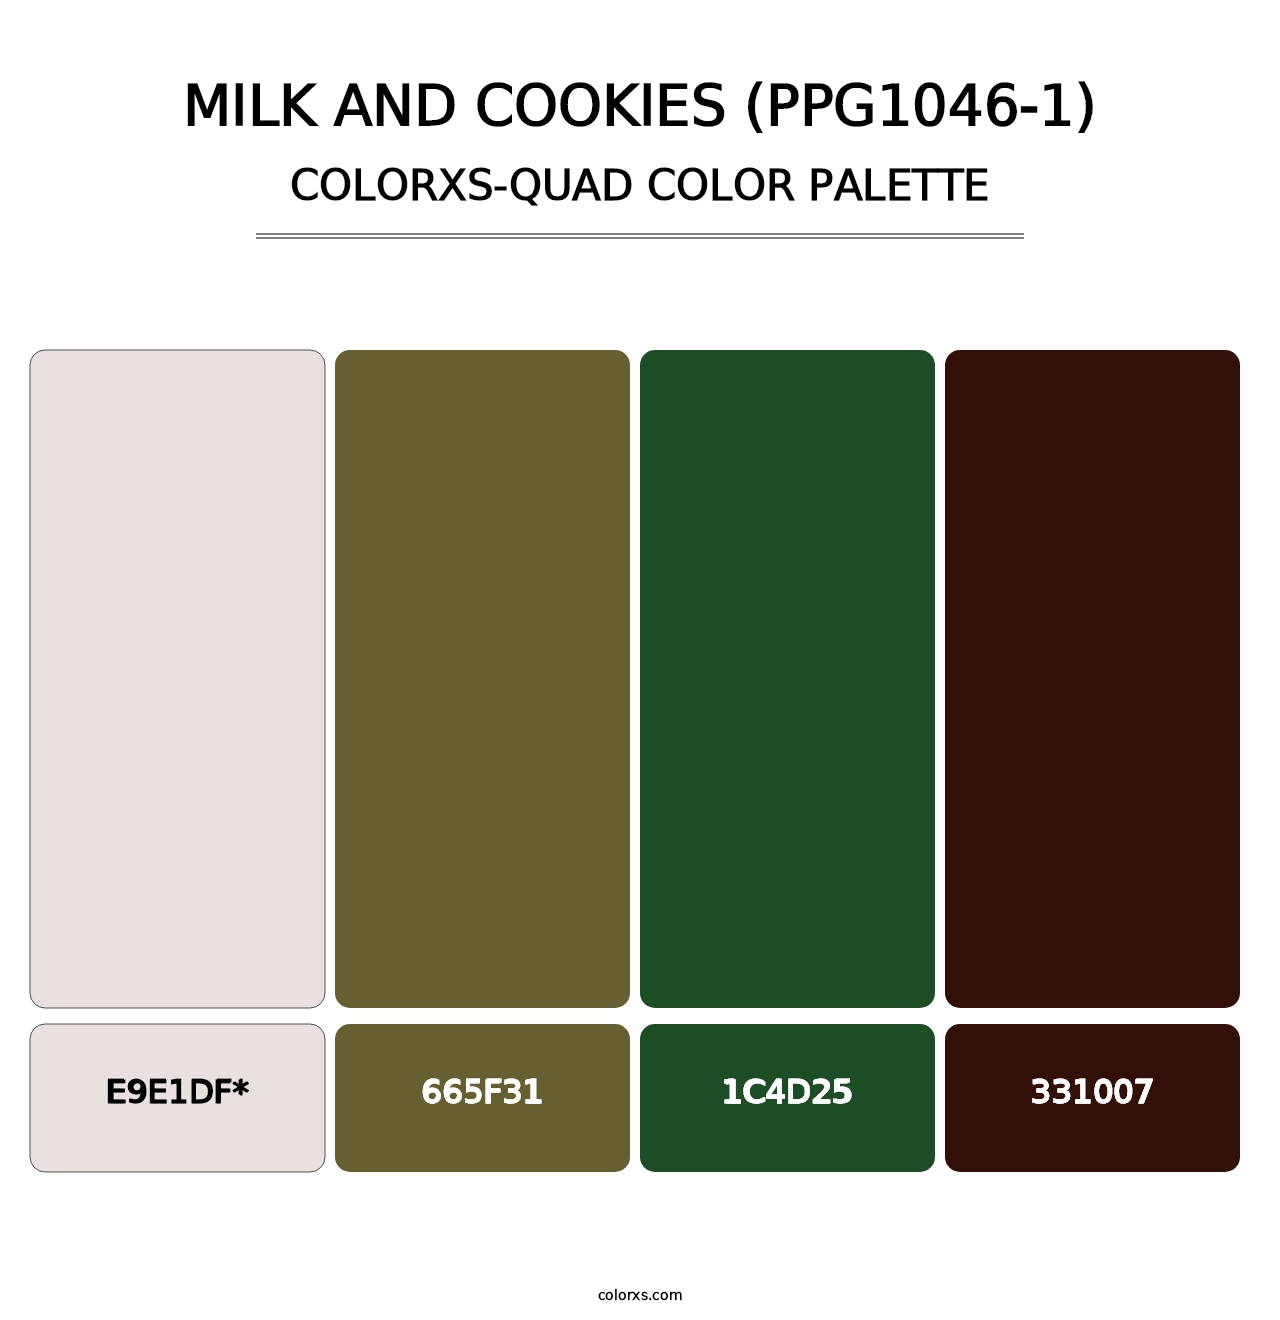 Milk And Cookies (PPG1046-1) - Colorxs Quad Palette